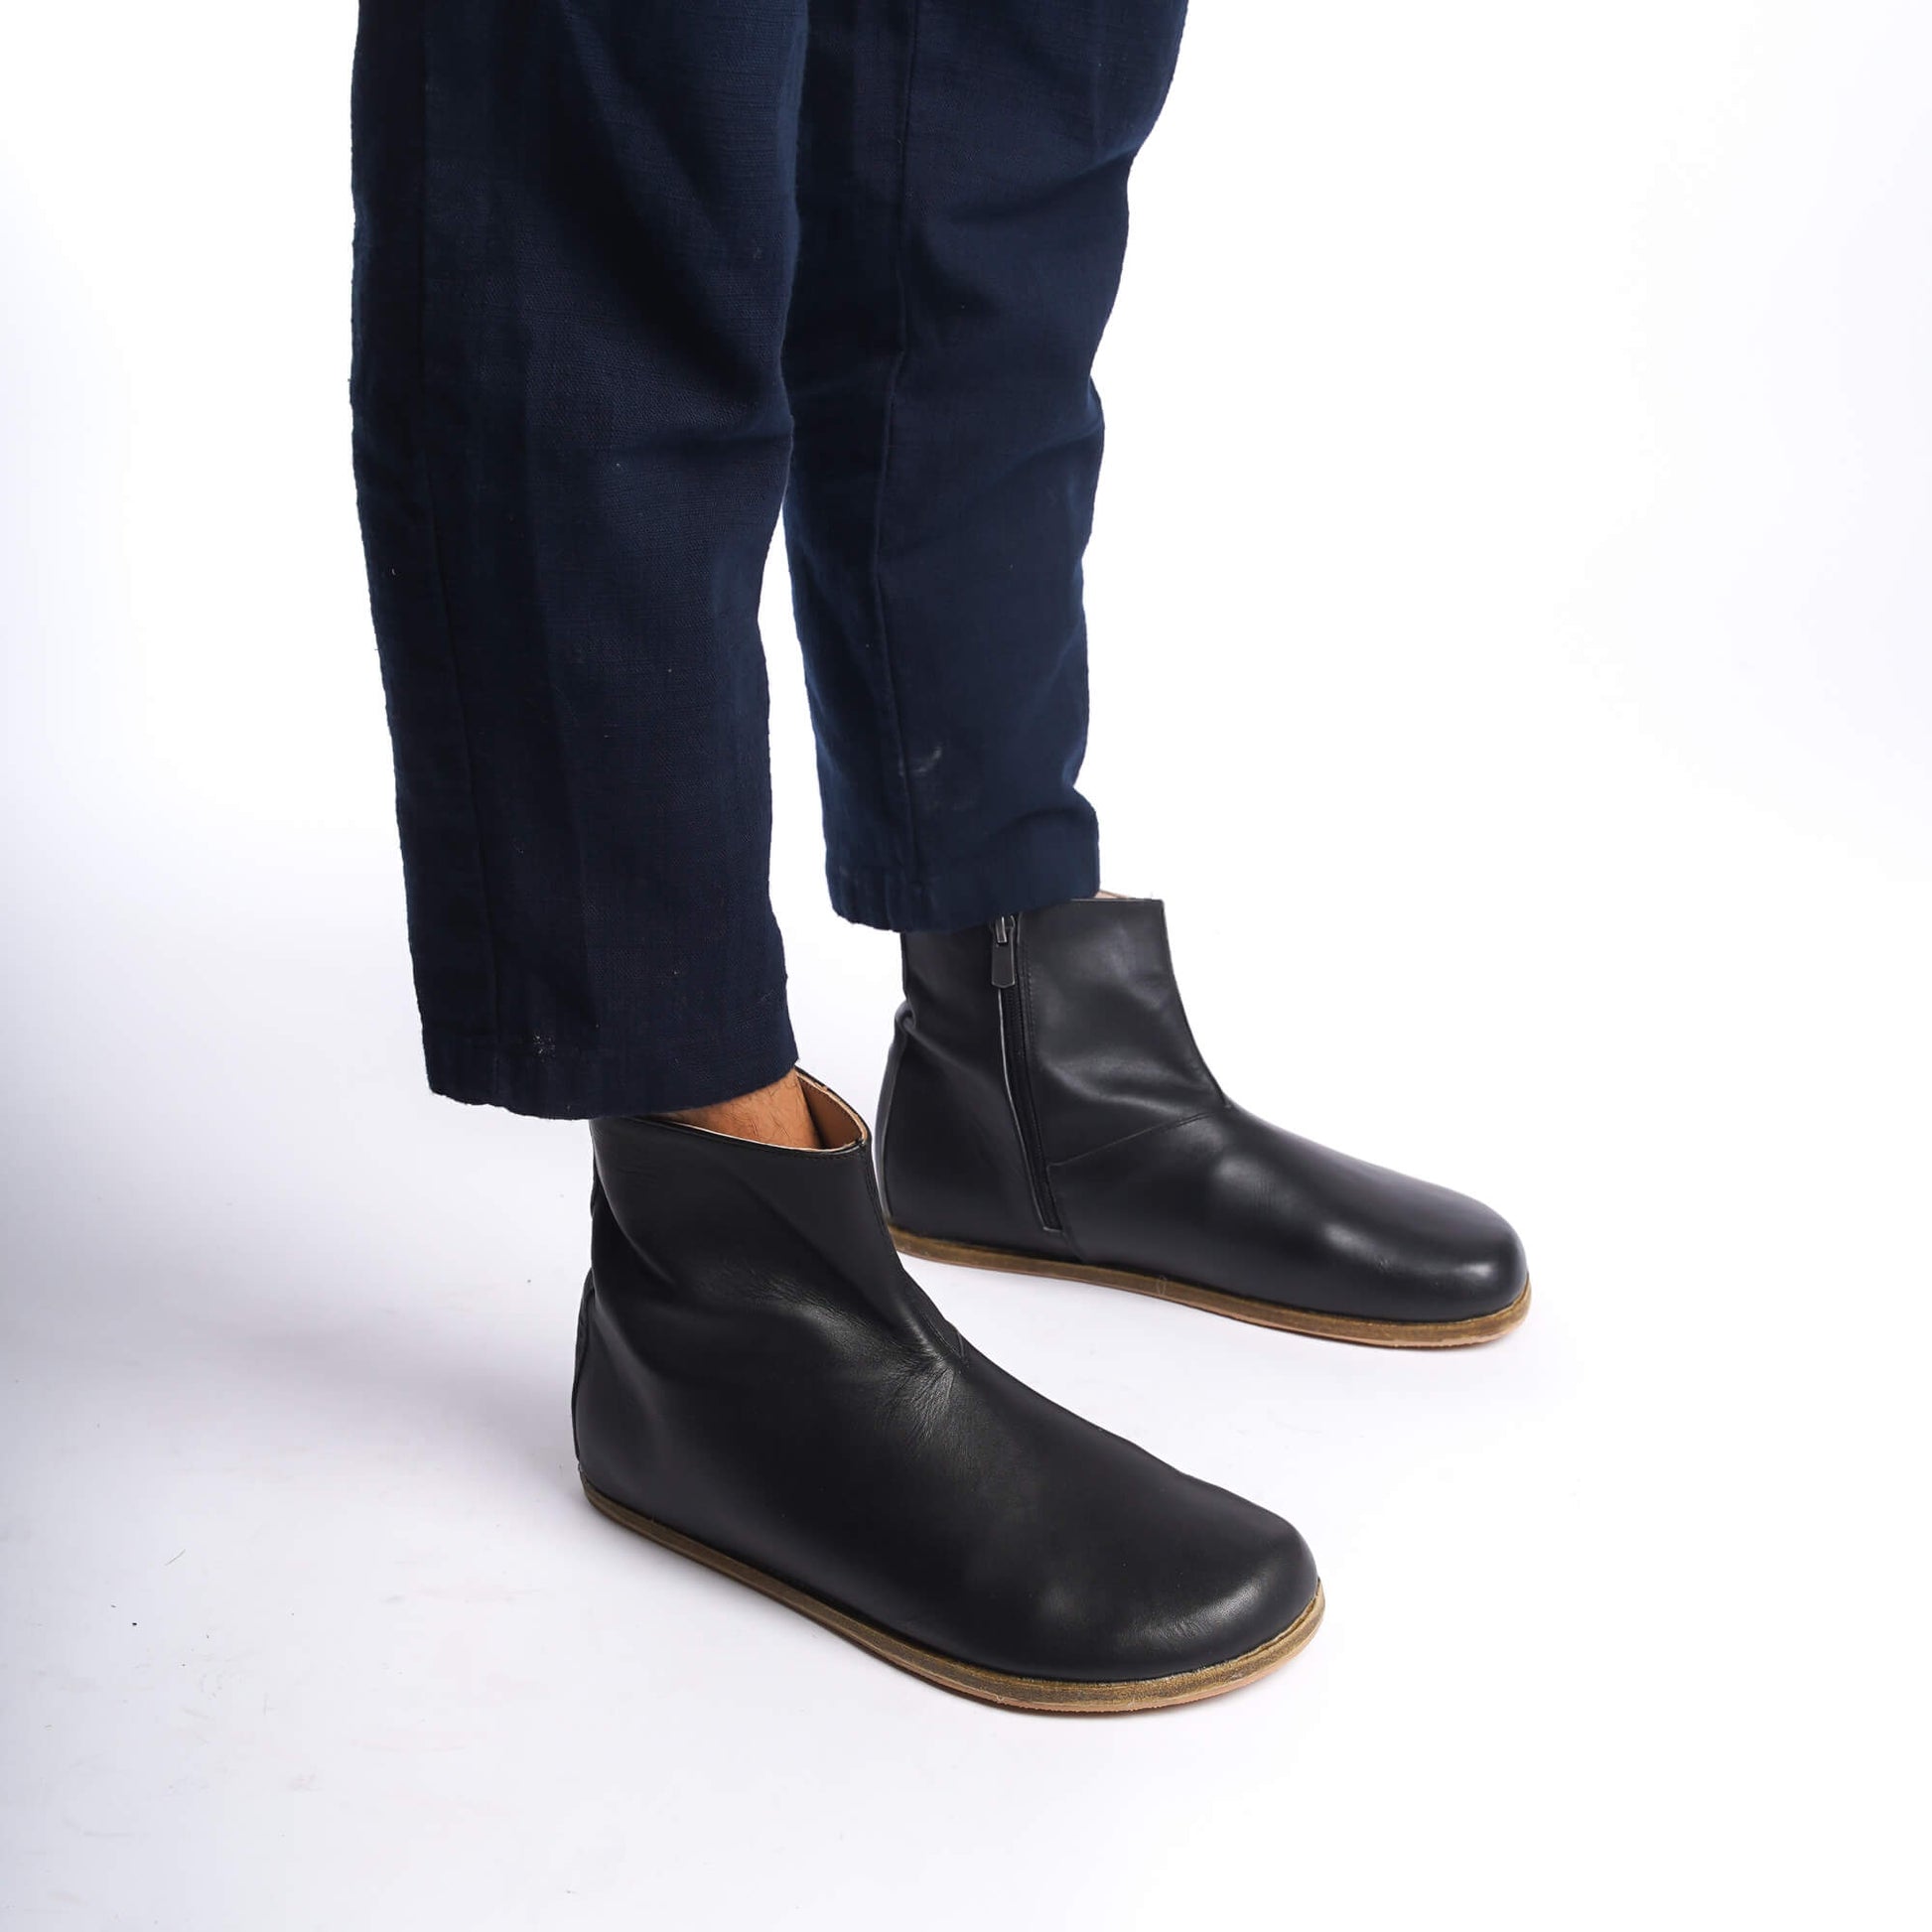 Side view of men's black ankle boots, showcasing the minimalist design and premium leather construction.